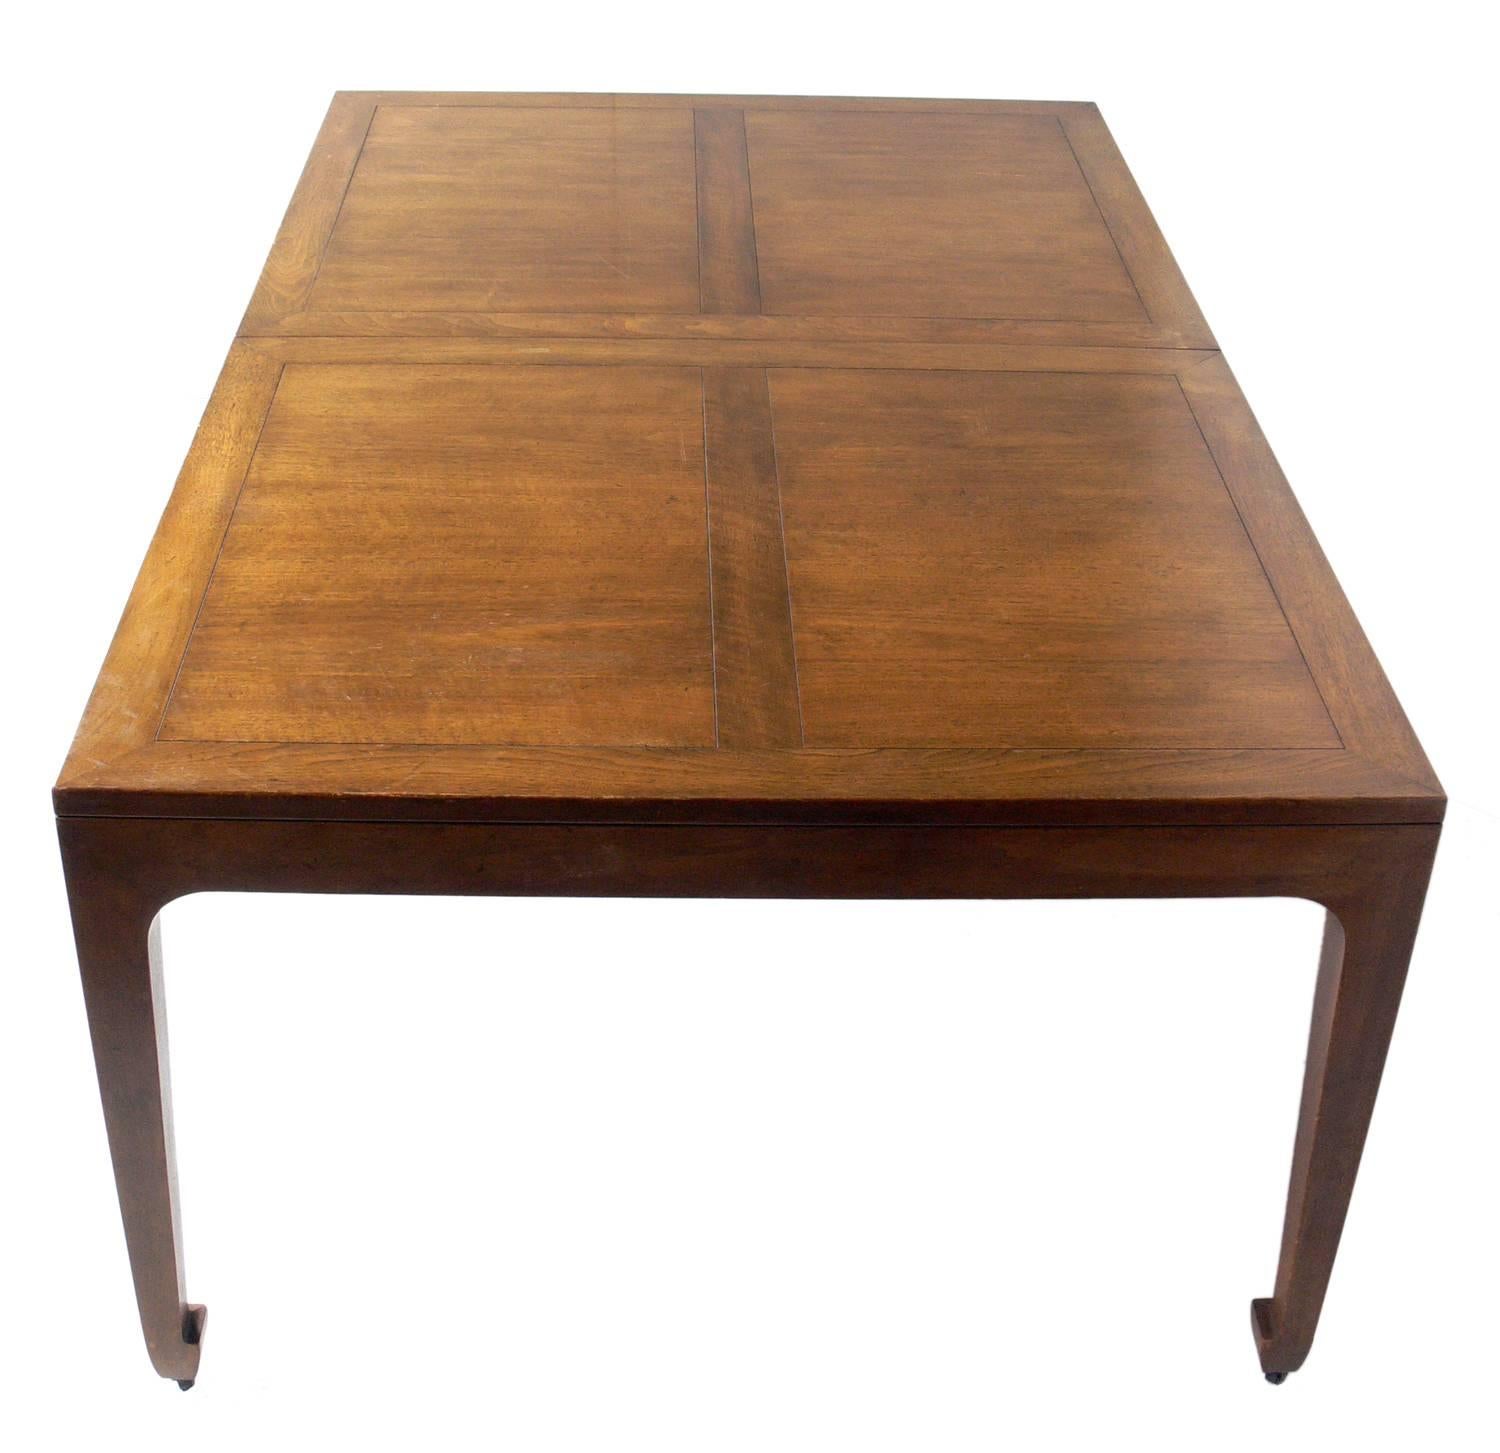 Hollywood Regency Asian Influenced Dining Table by Michael Taylor for Baker Seats 6-12